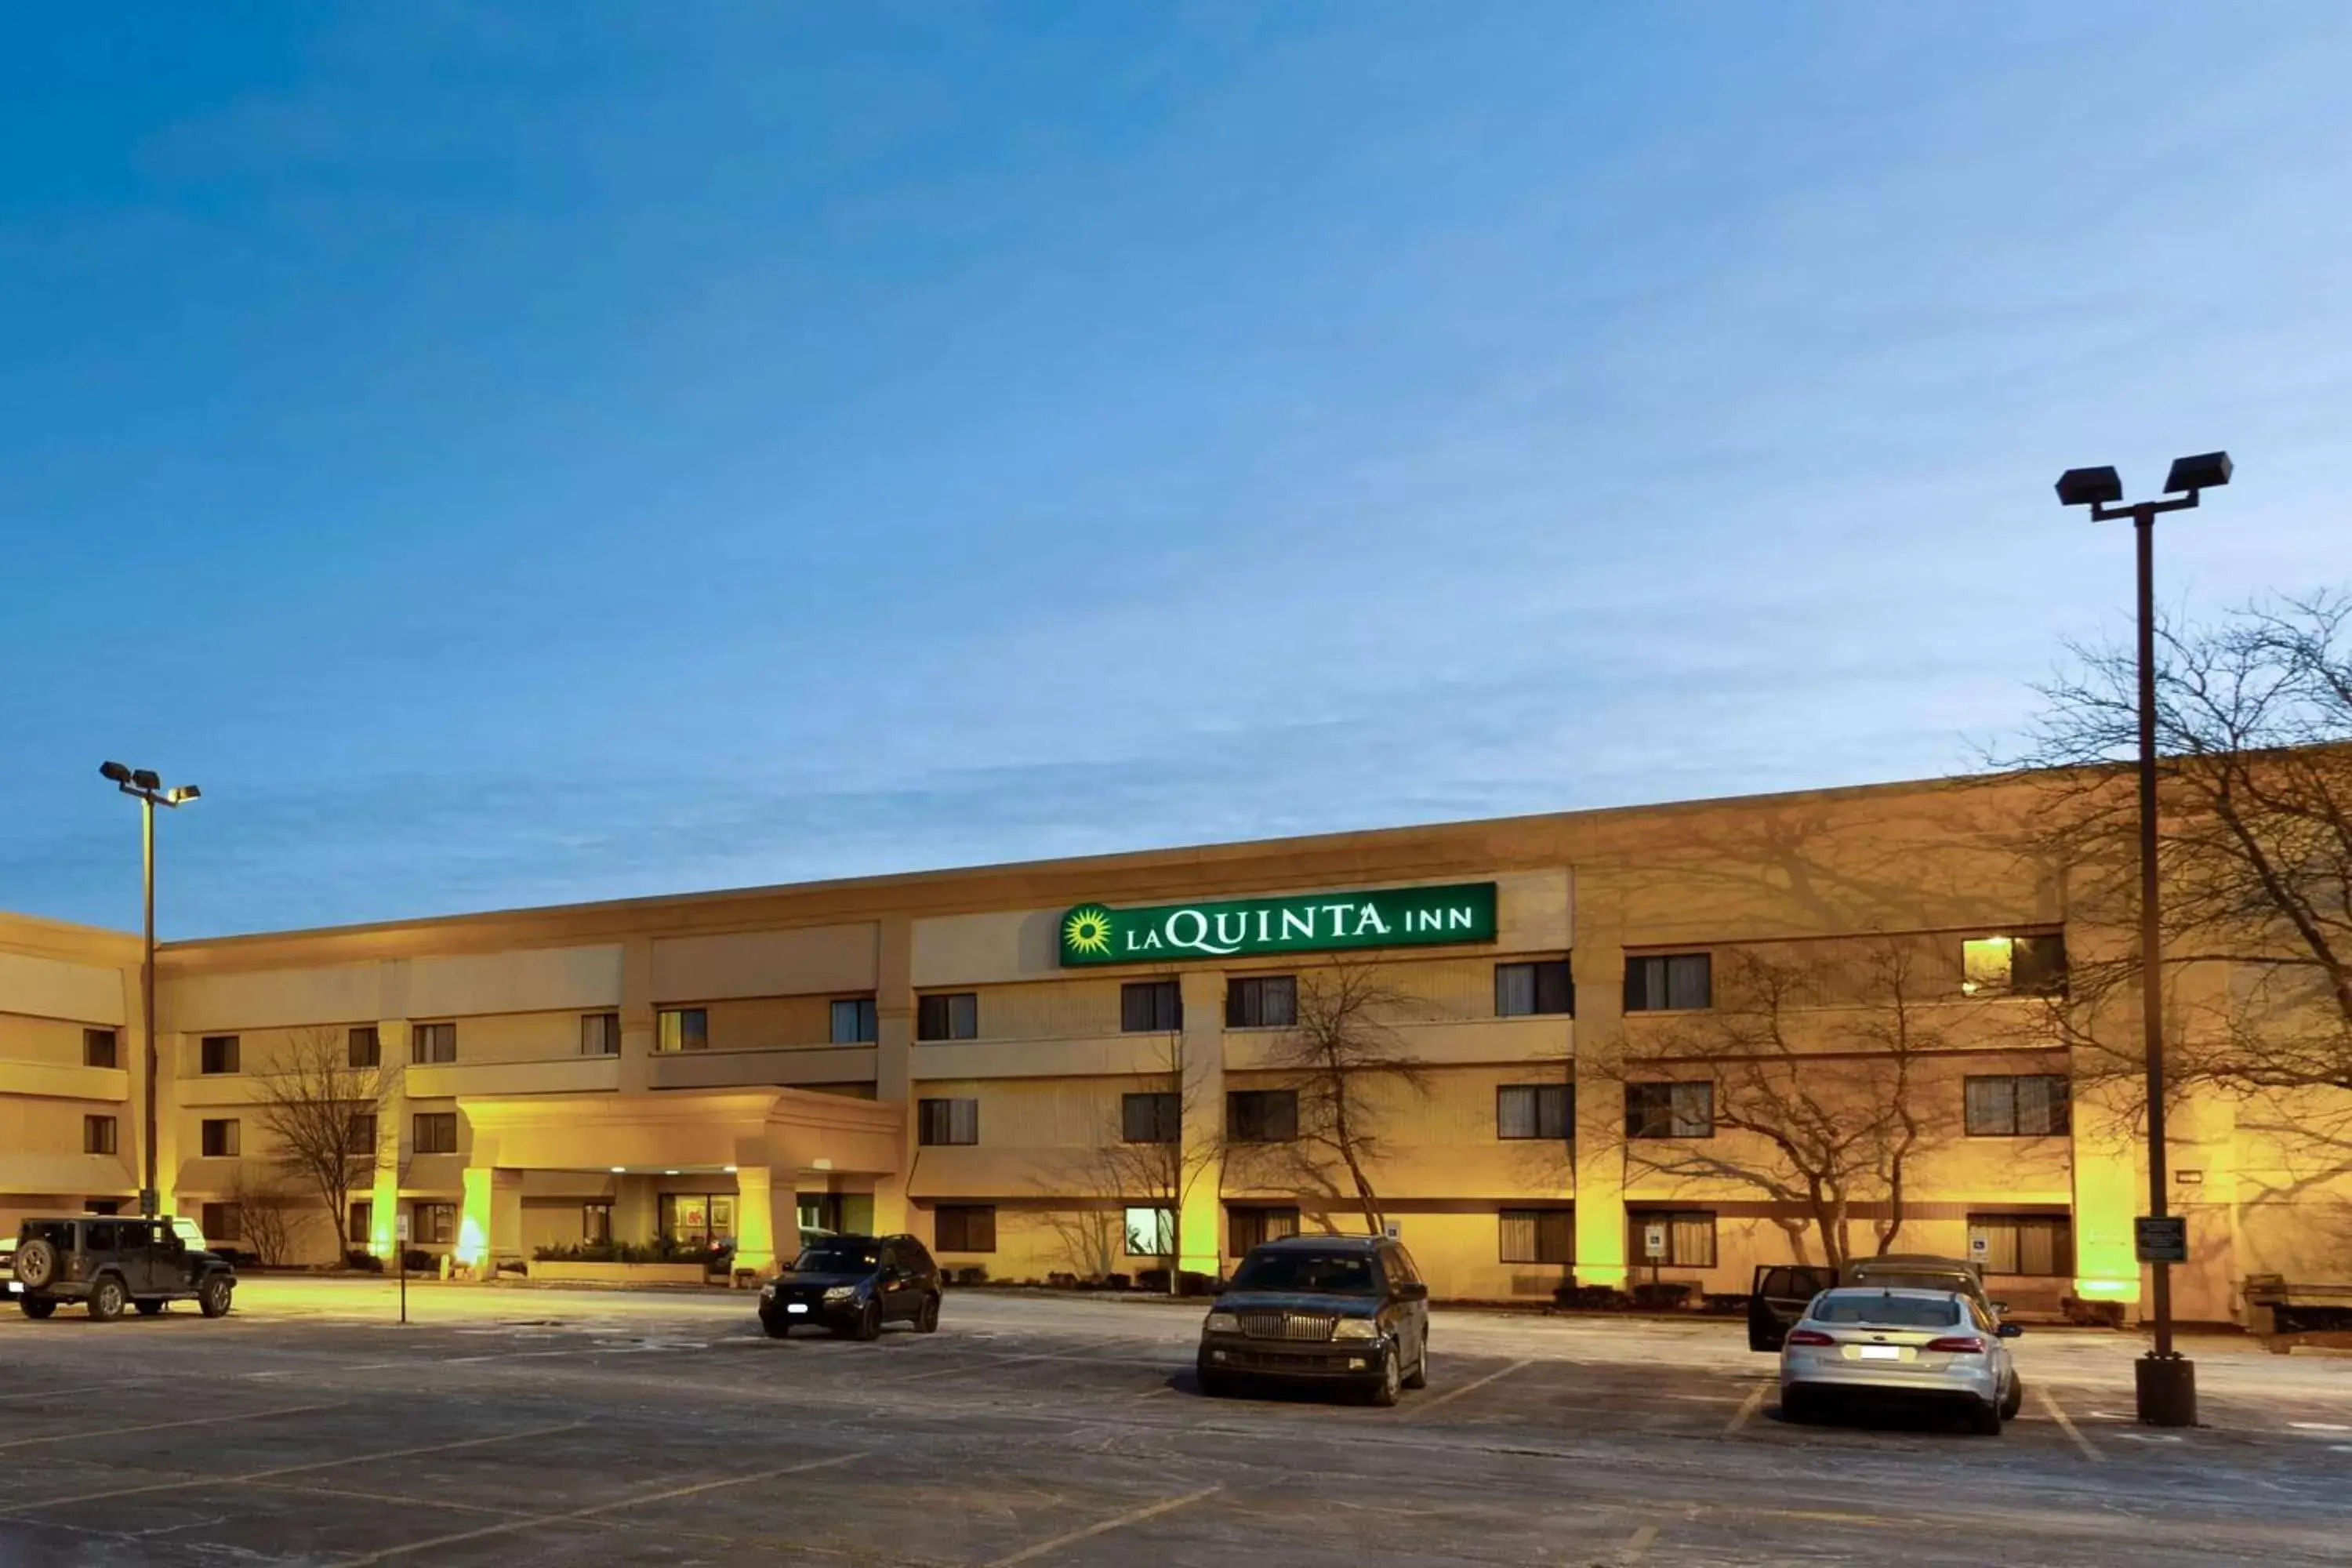 Property building in La Quinta Inn by Wyndham Chicago Willowbrook